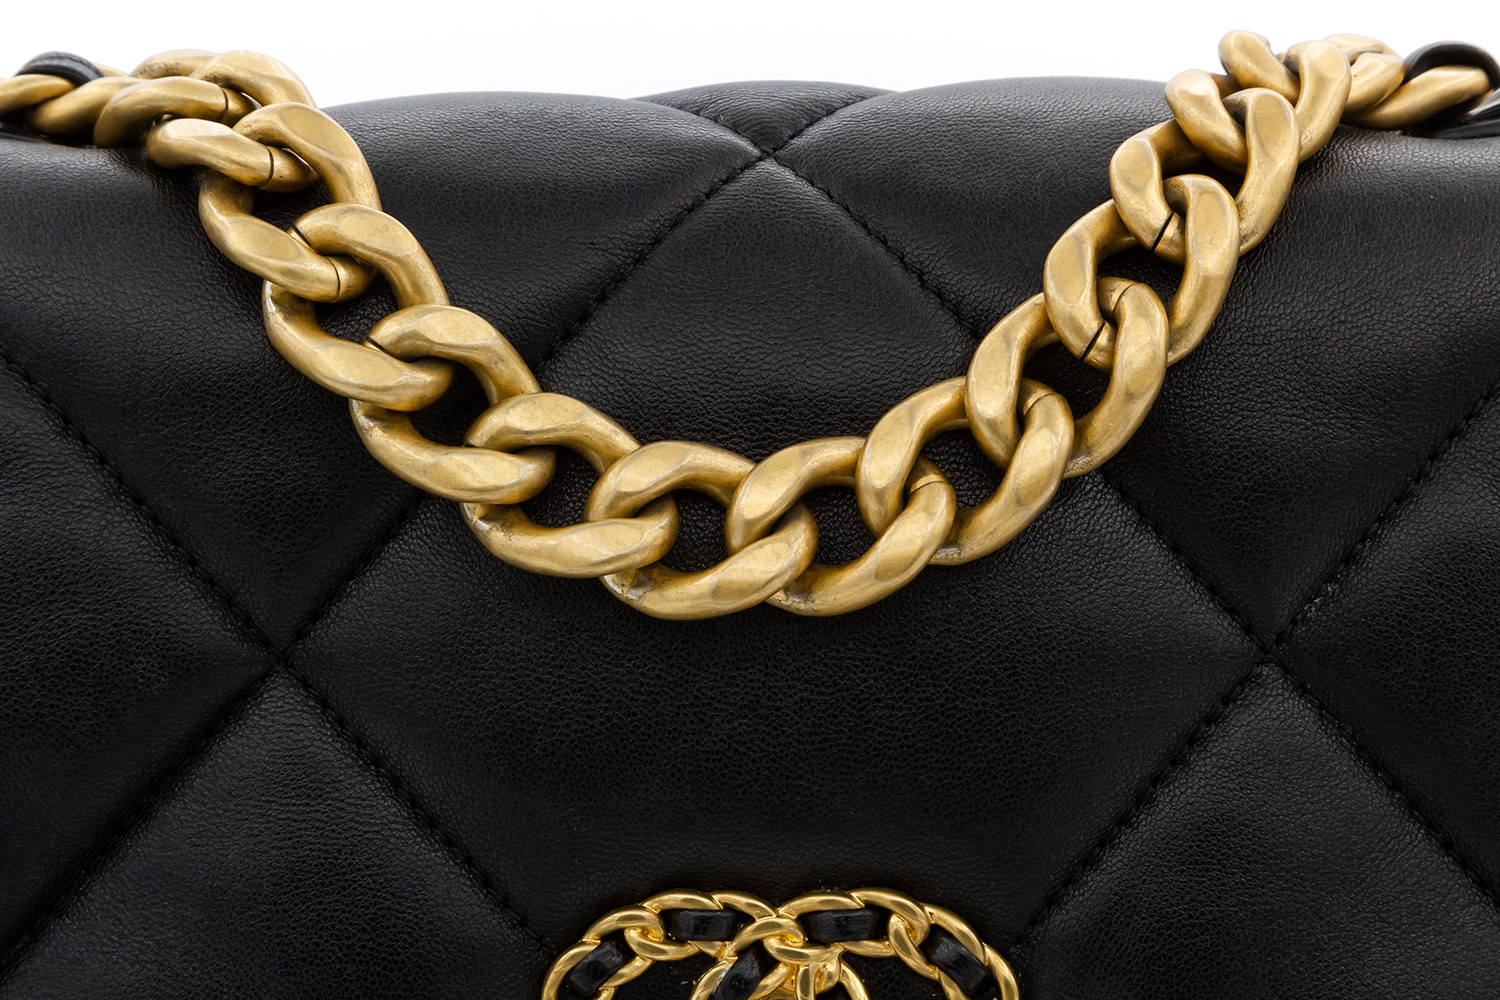 Chanel Black Lambskin Leather Quilted Large 19 Flap Bag